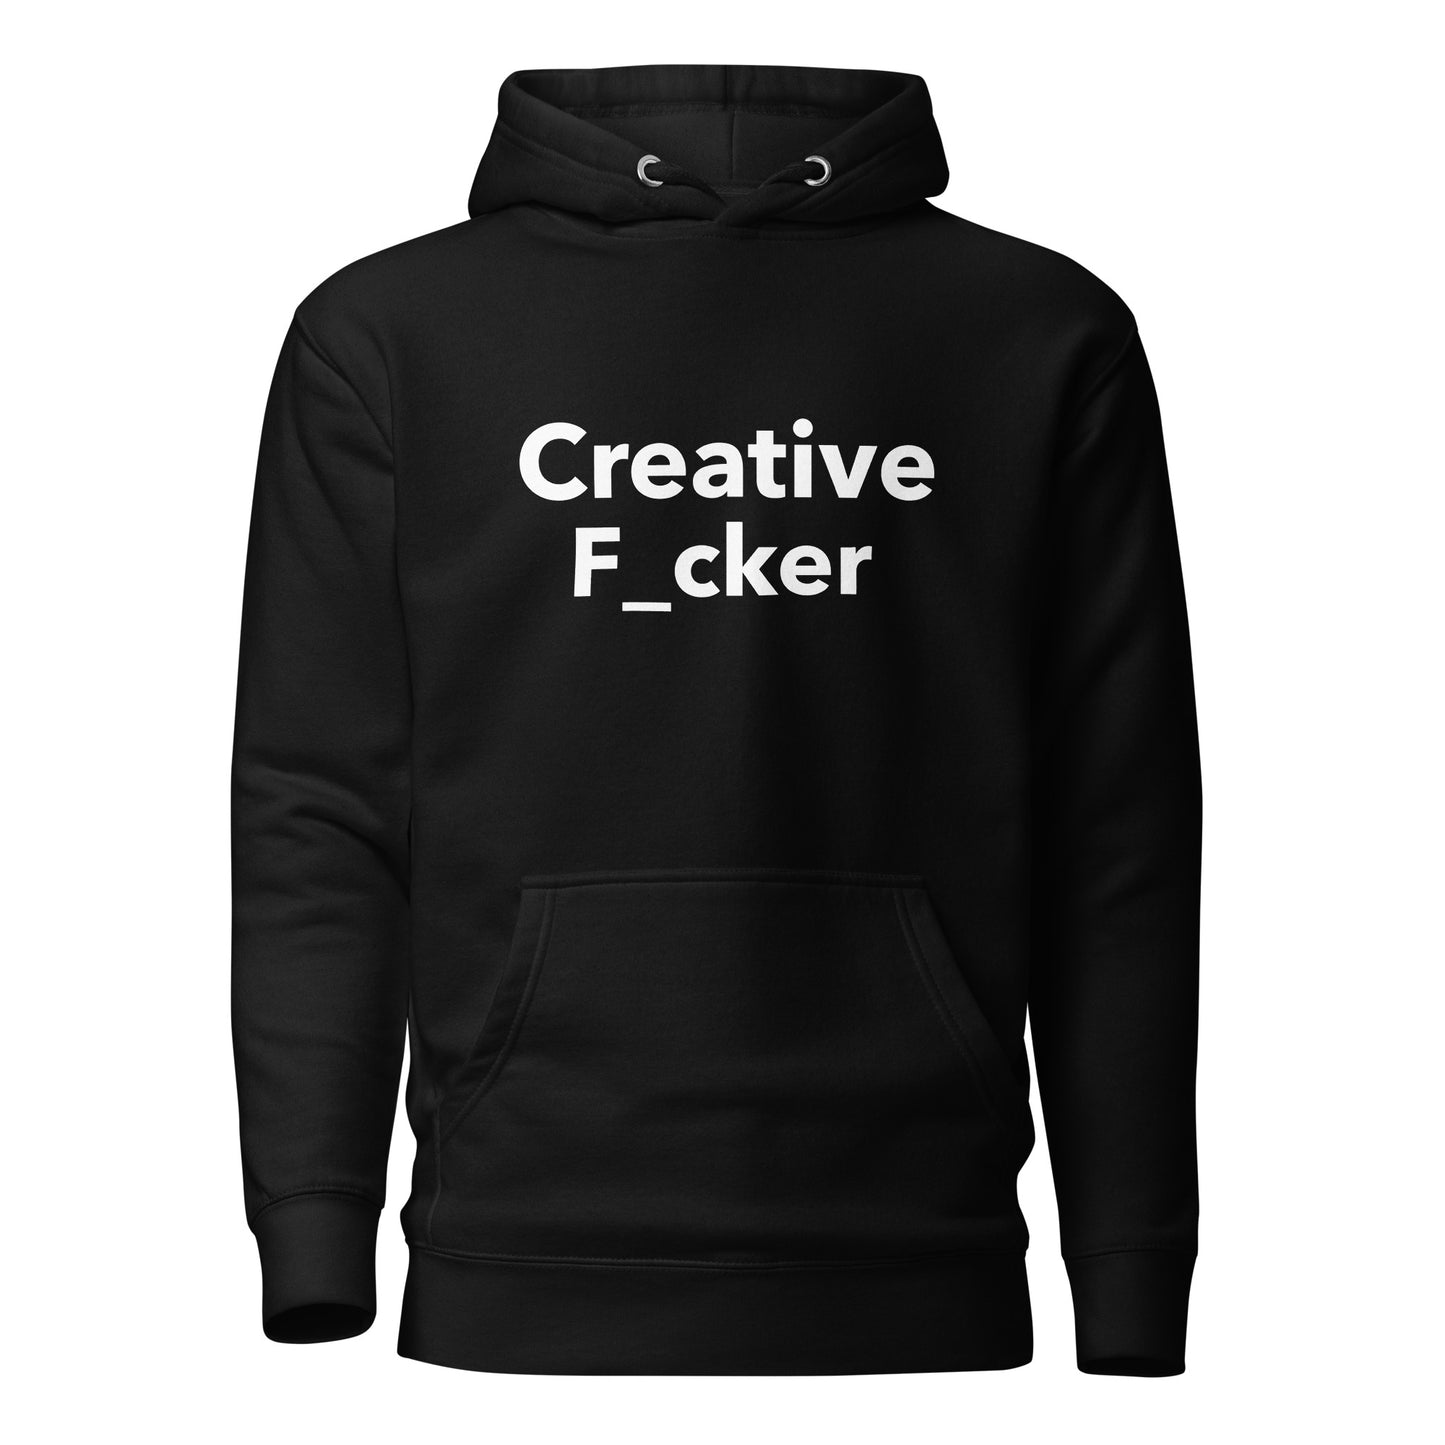 Creative F_cker - Unisex Hoodie with Front Pouch